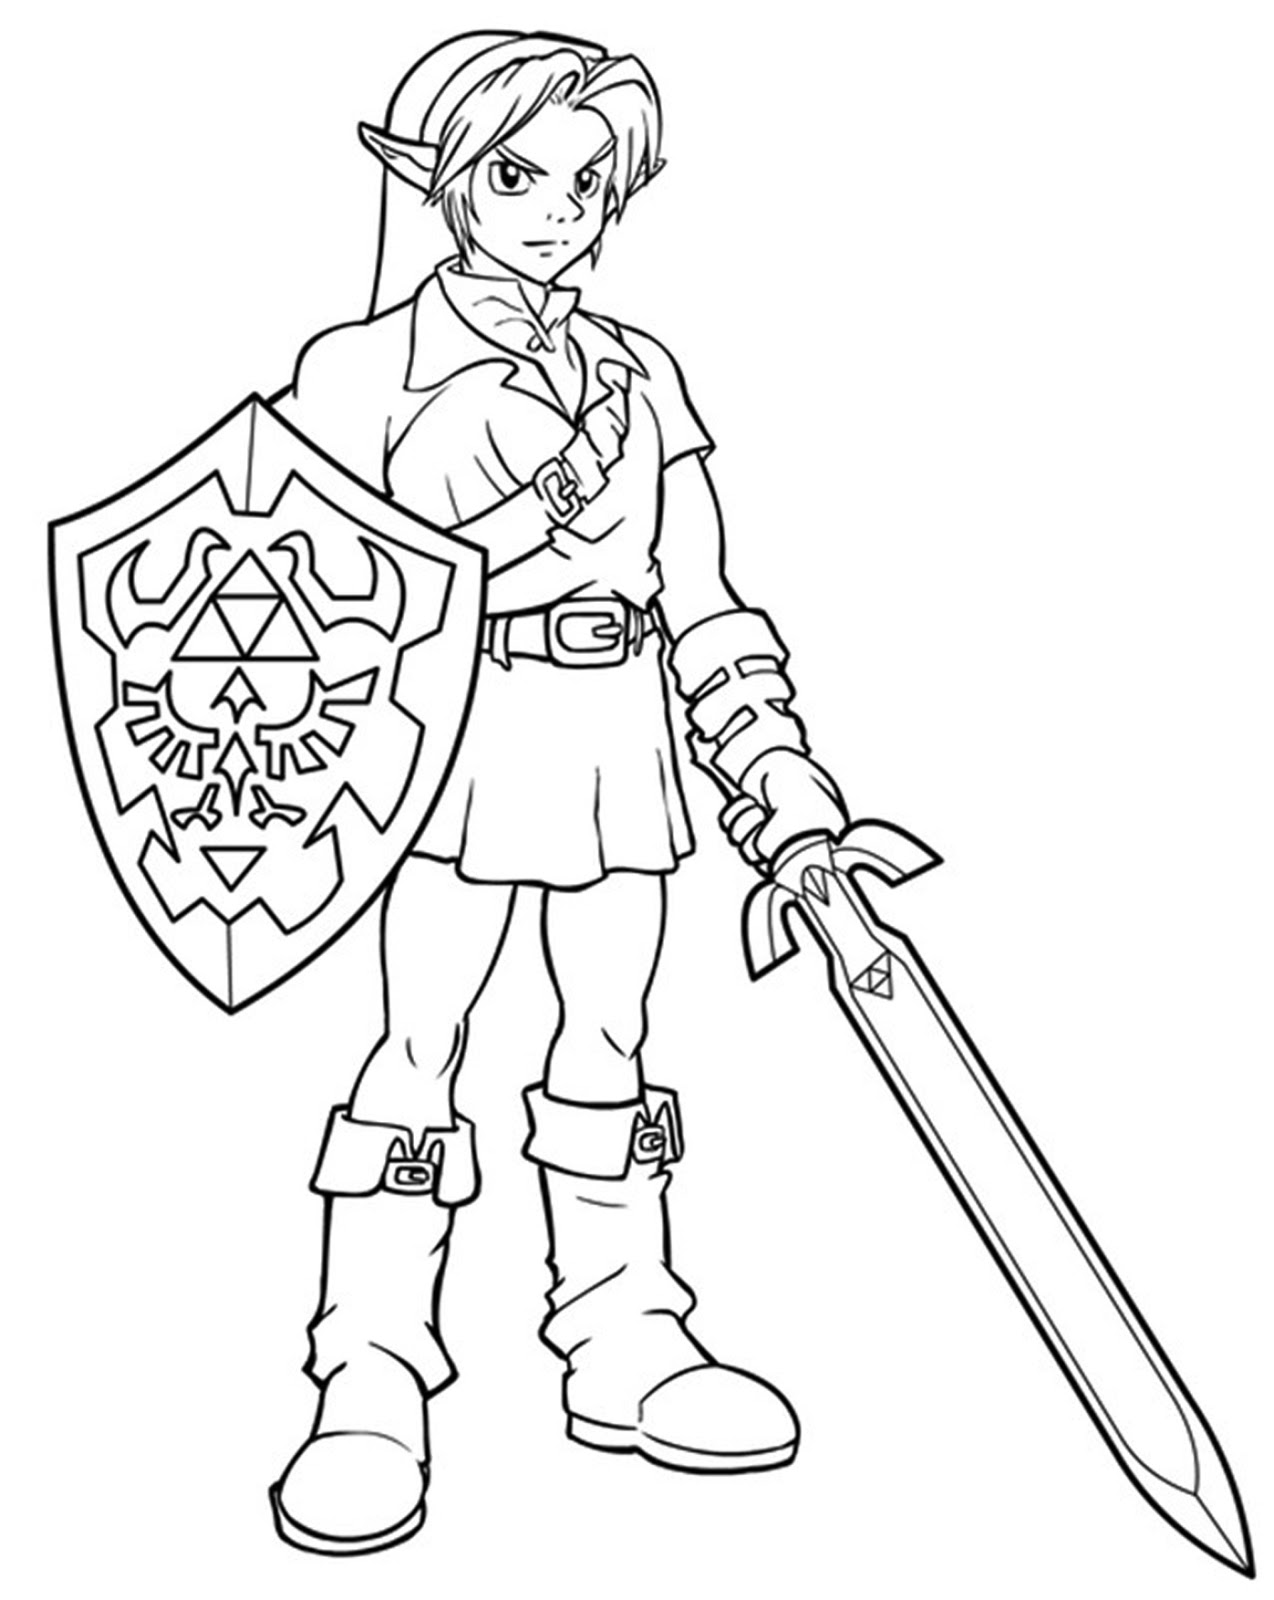 Download More Adult colouring pages here on gamezplay